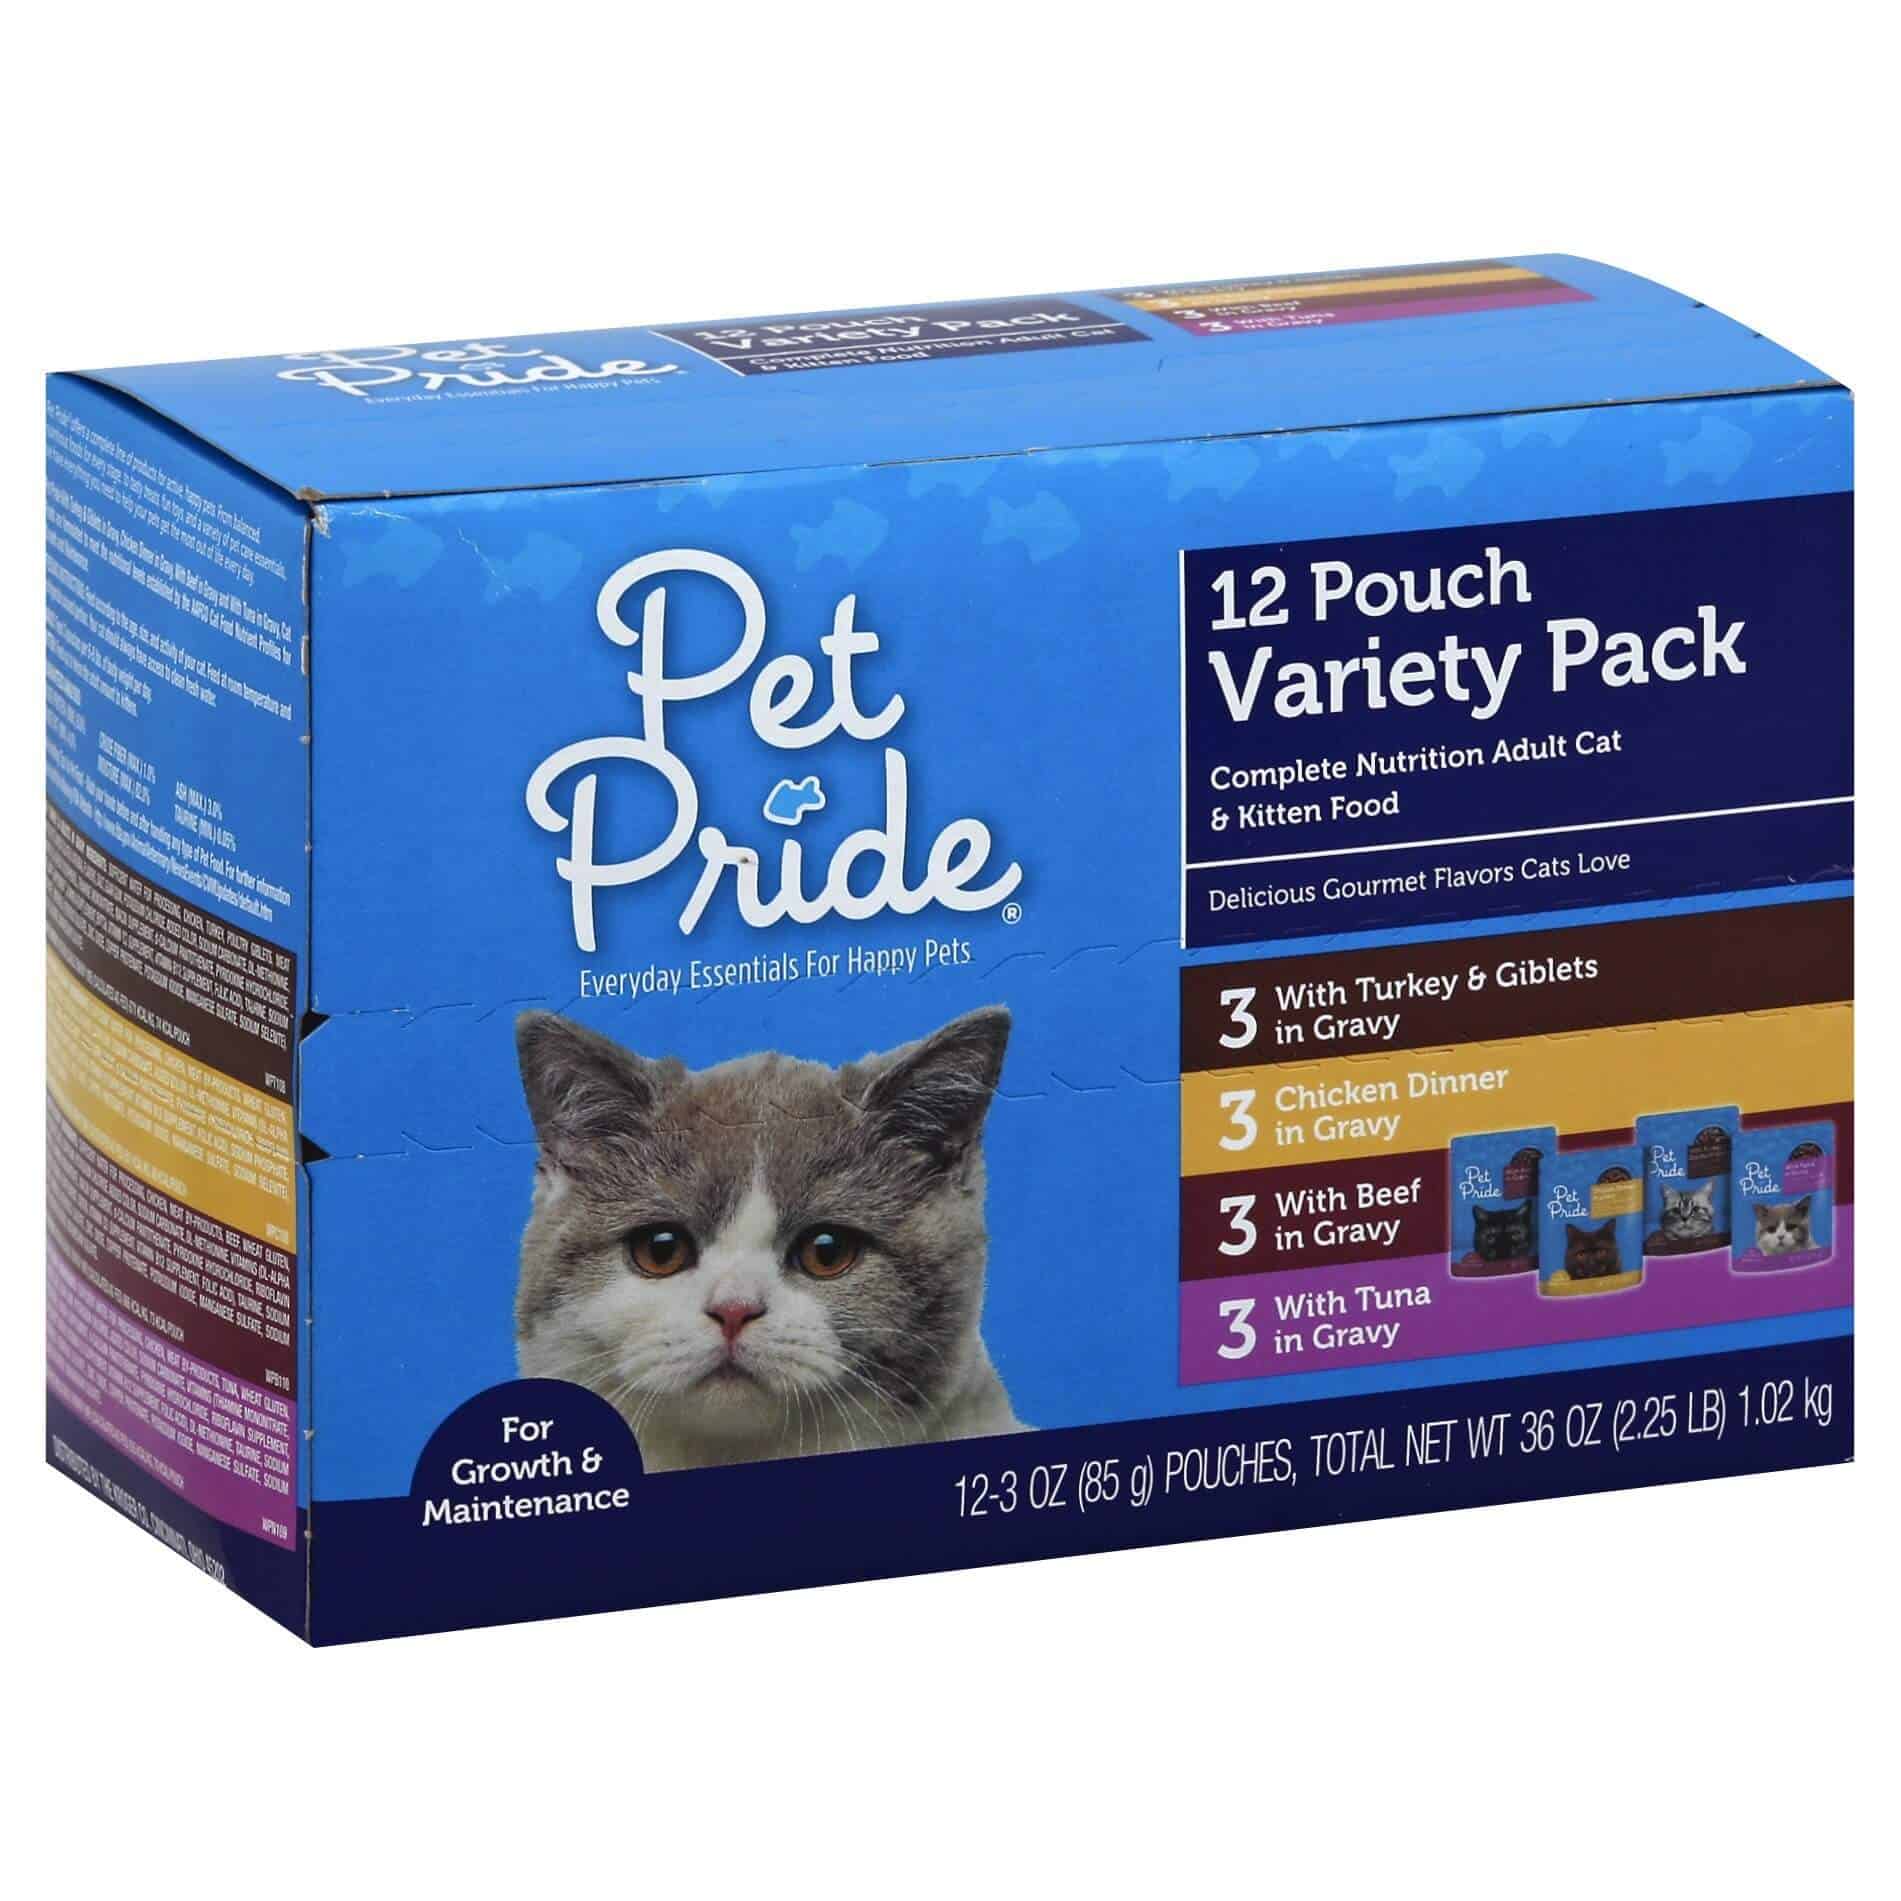 Pet Pride Cat Food Review What You Need to Know